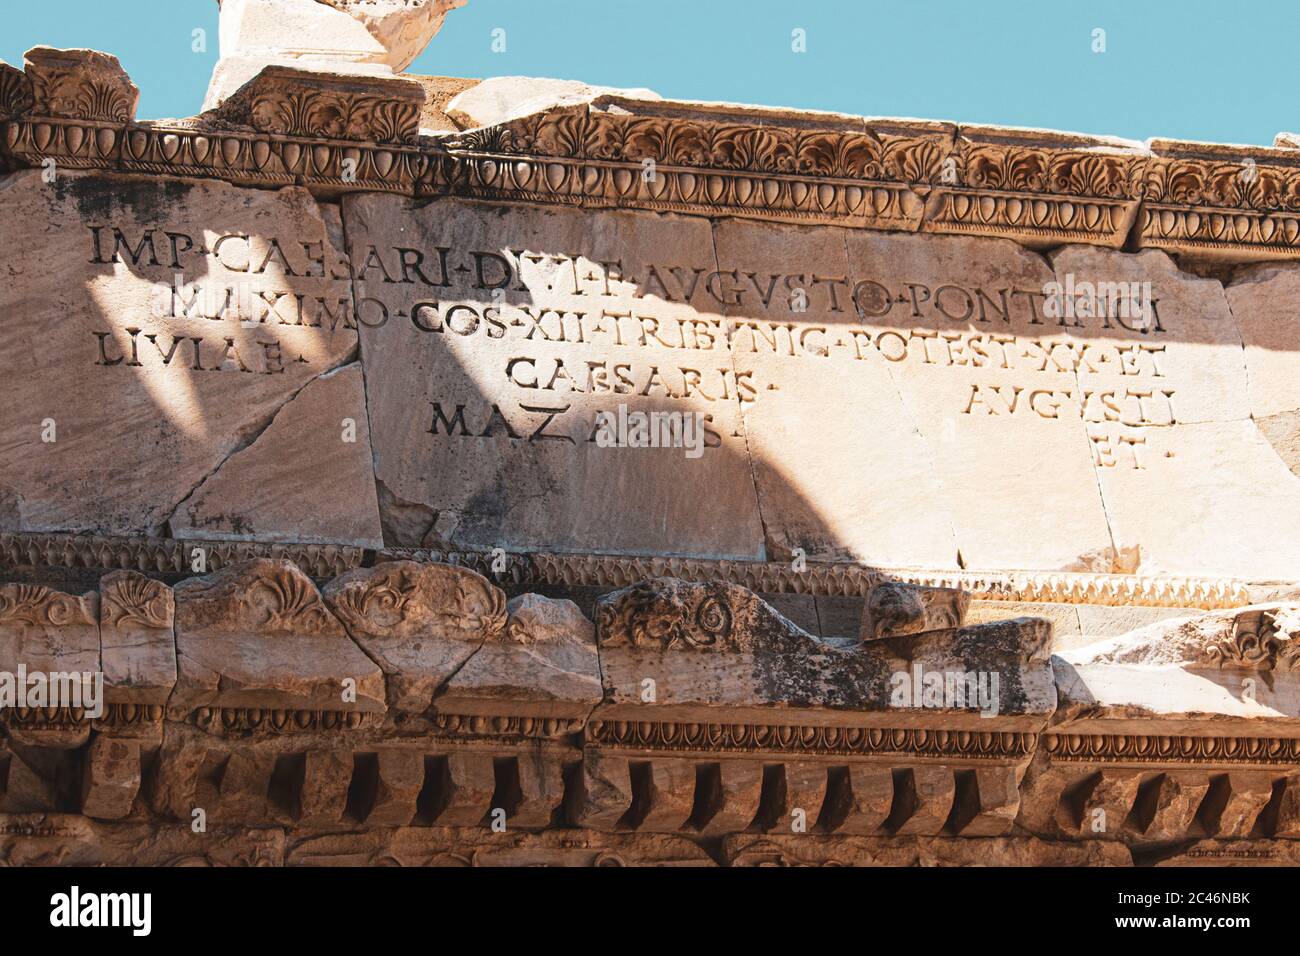 Mazeus-Mithridates inscription on the South gate of Agora in the Greek ancient city of Ephesus, Turkey. Stock Photo